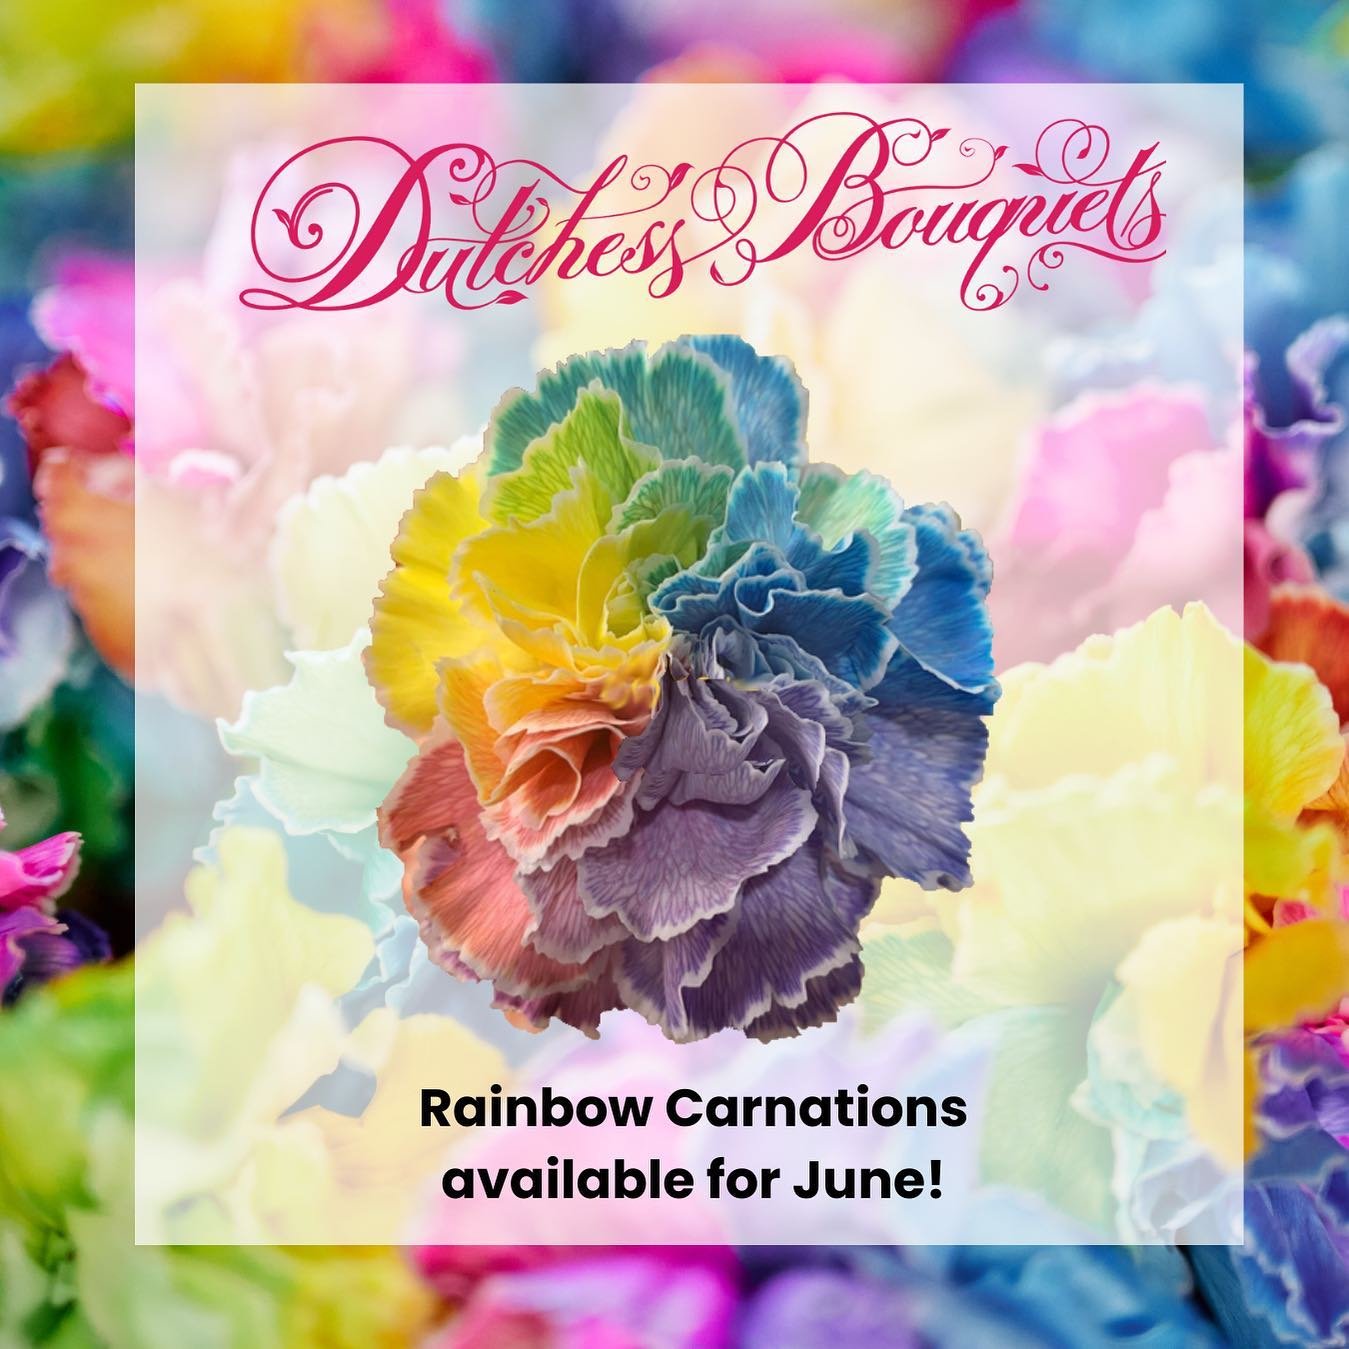 Carnations symbolize pride and beauty, while rainbows represent joy and positivity. Rainbow carnations embody finding beauty after a storm, inspire optimism and embrace unity. Make sure to stock up on these amazing blooms!
&bull;
&bull;
&bull;
&bull;